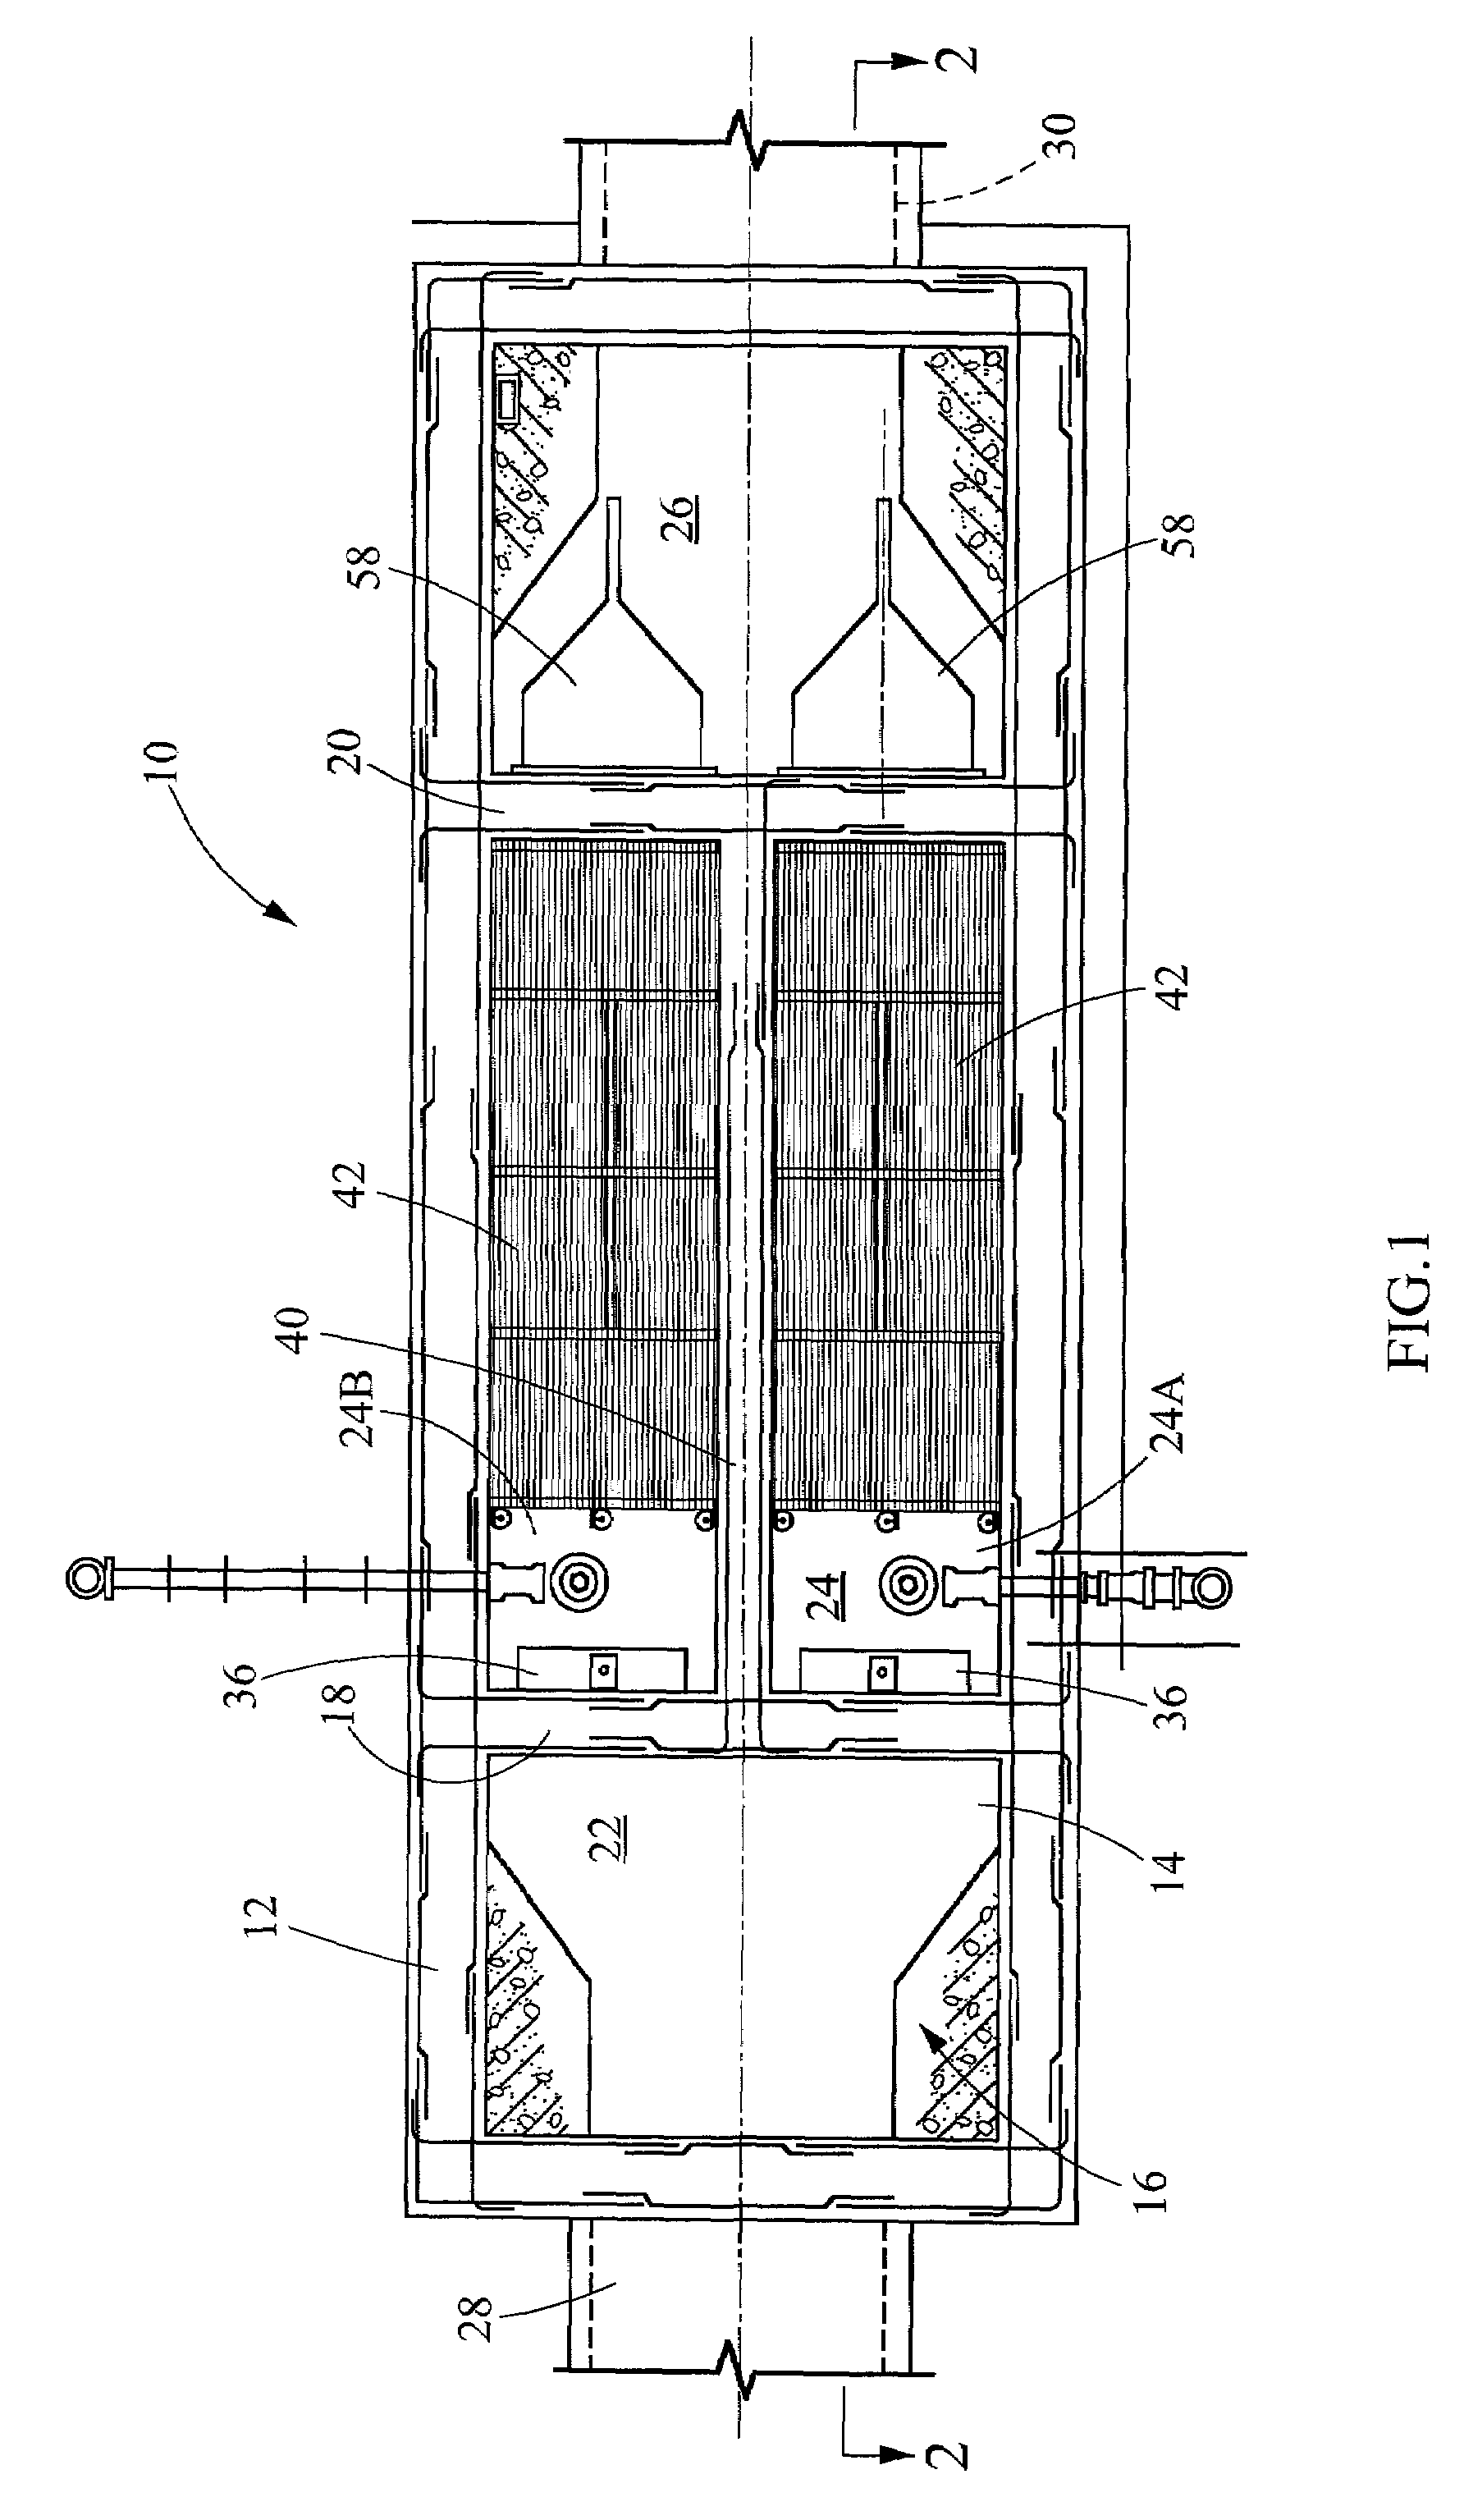 Apparatus and method for the removal of solids and floatables from a wastewater stream